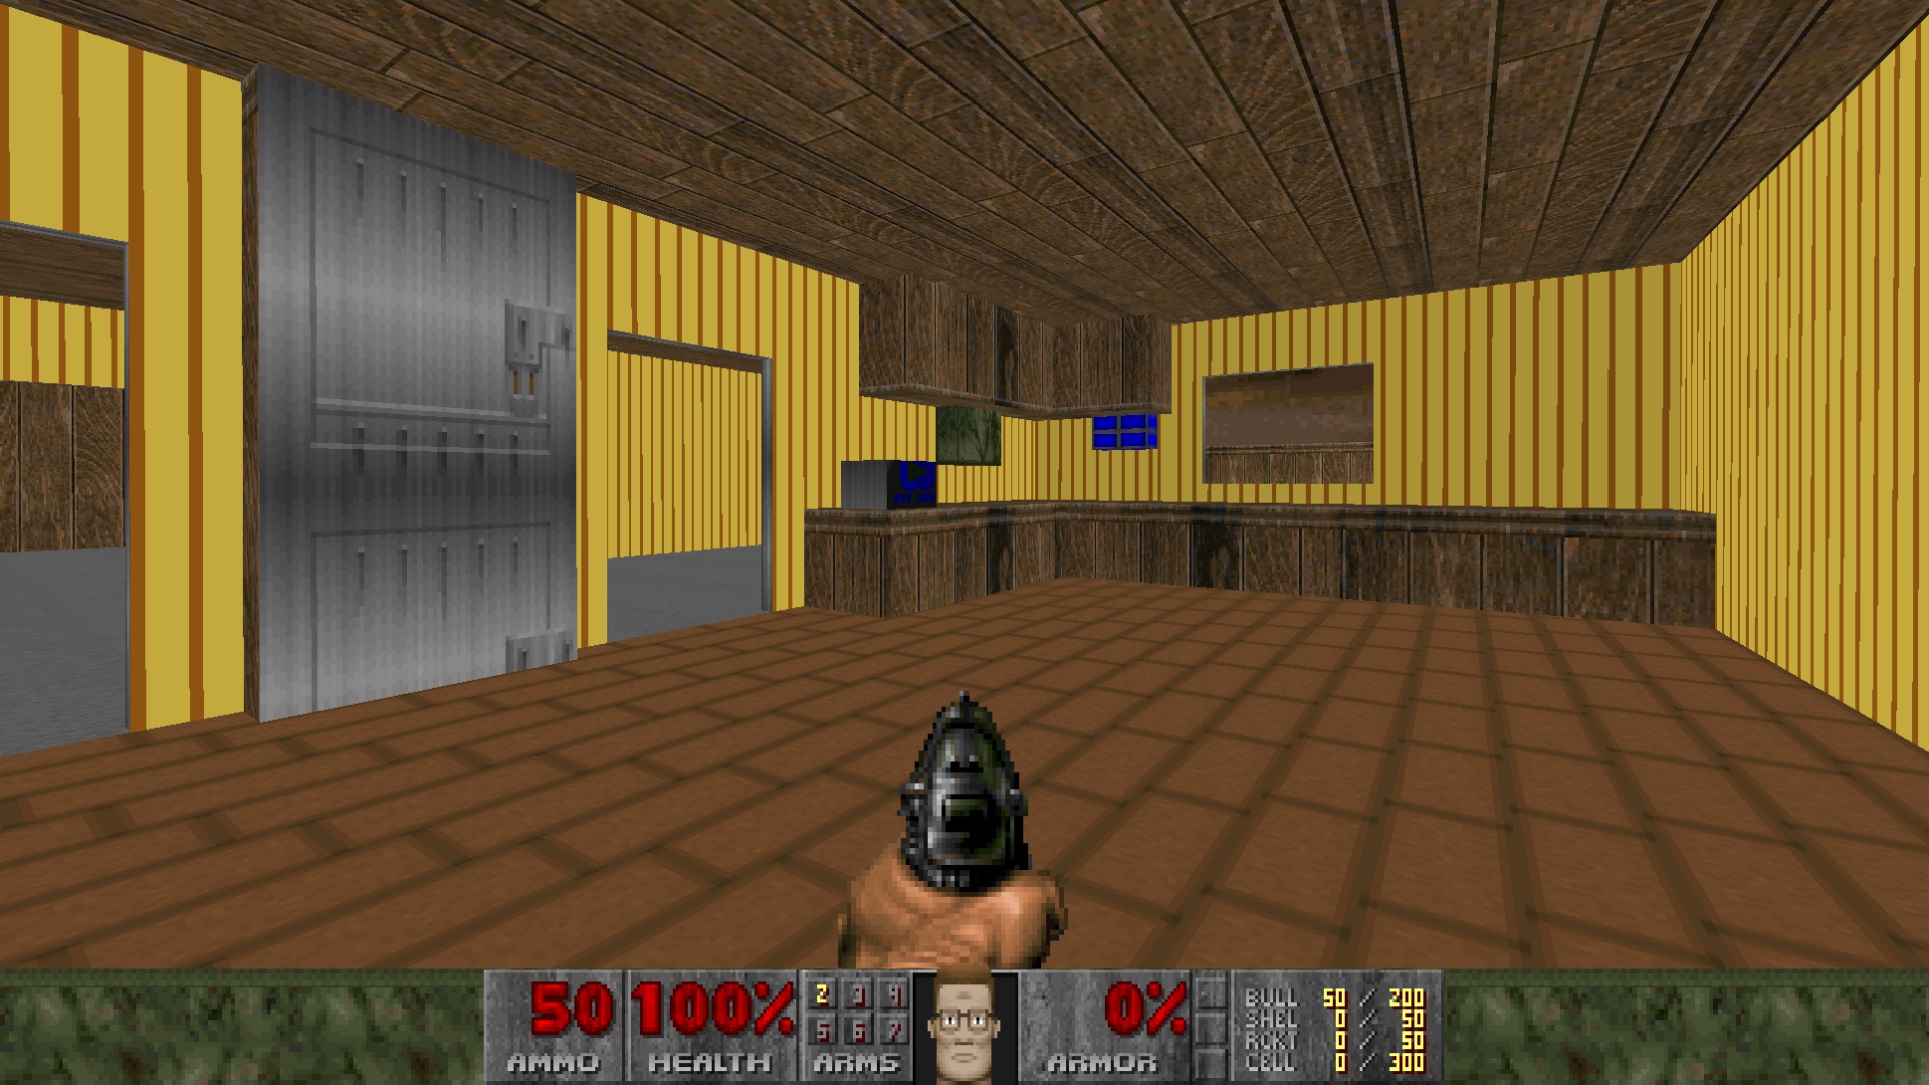 Doom engine recreation of the Hill residence from King of the Hill